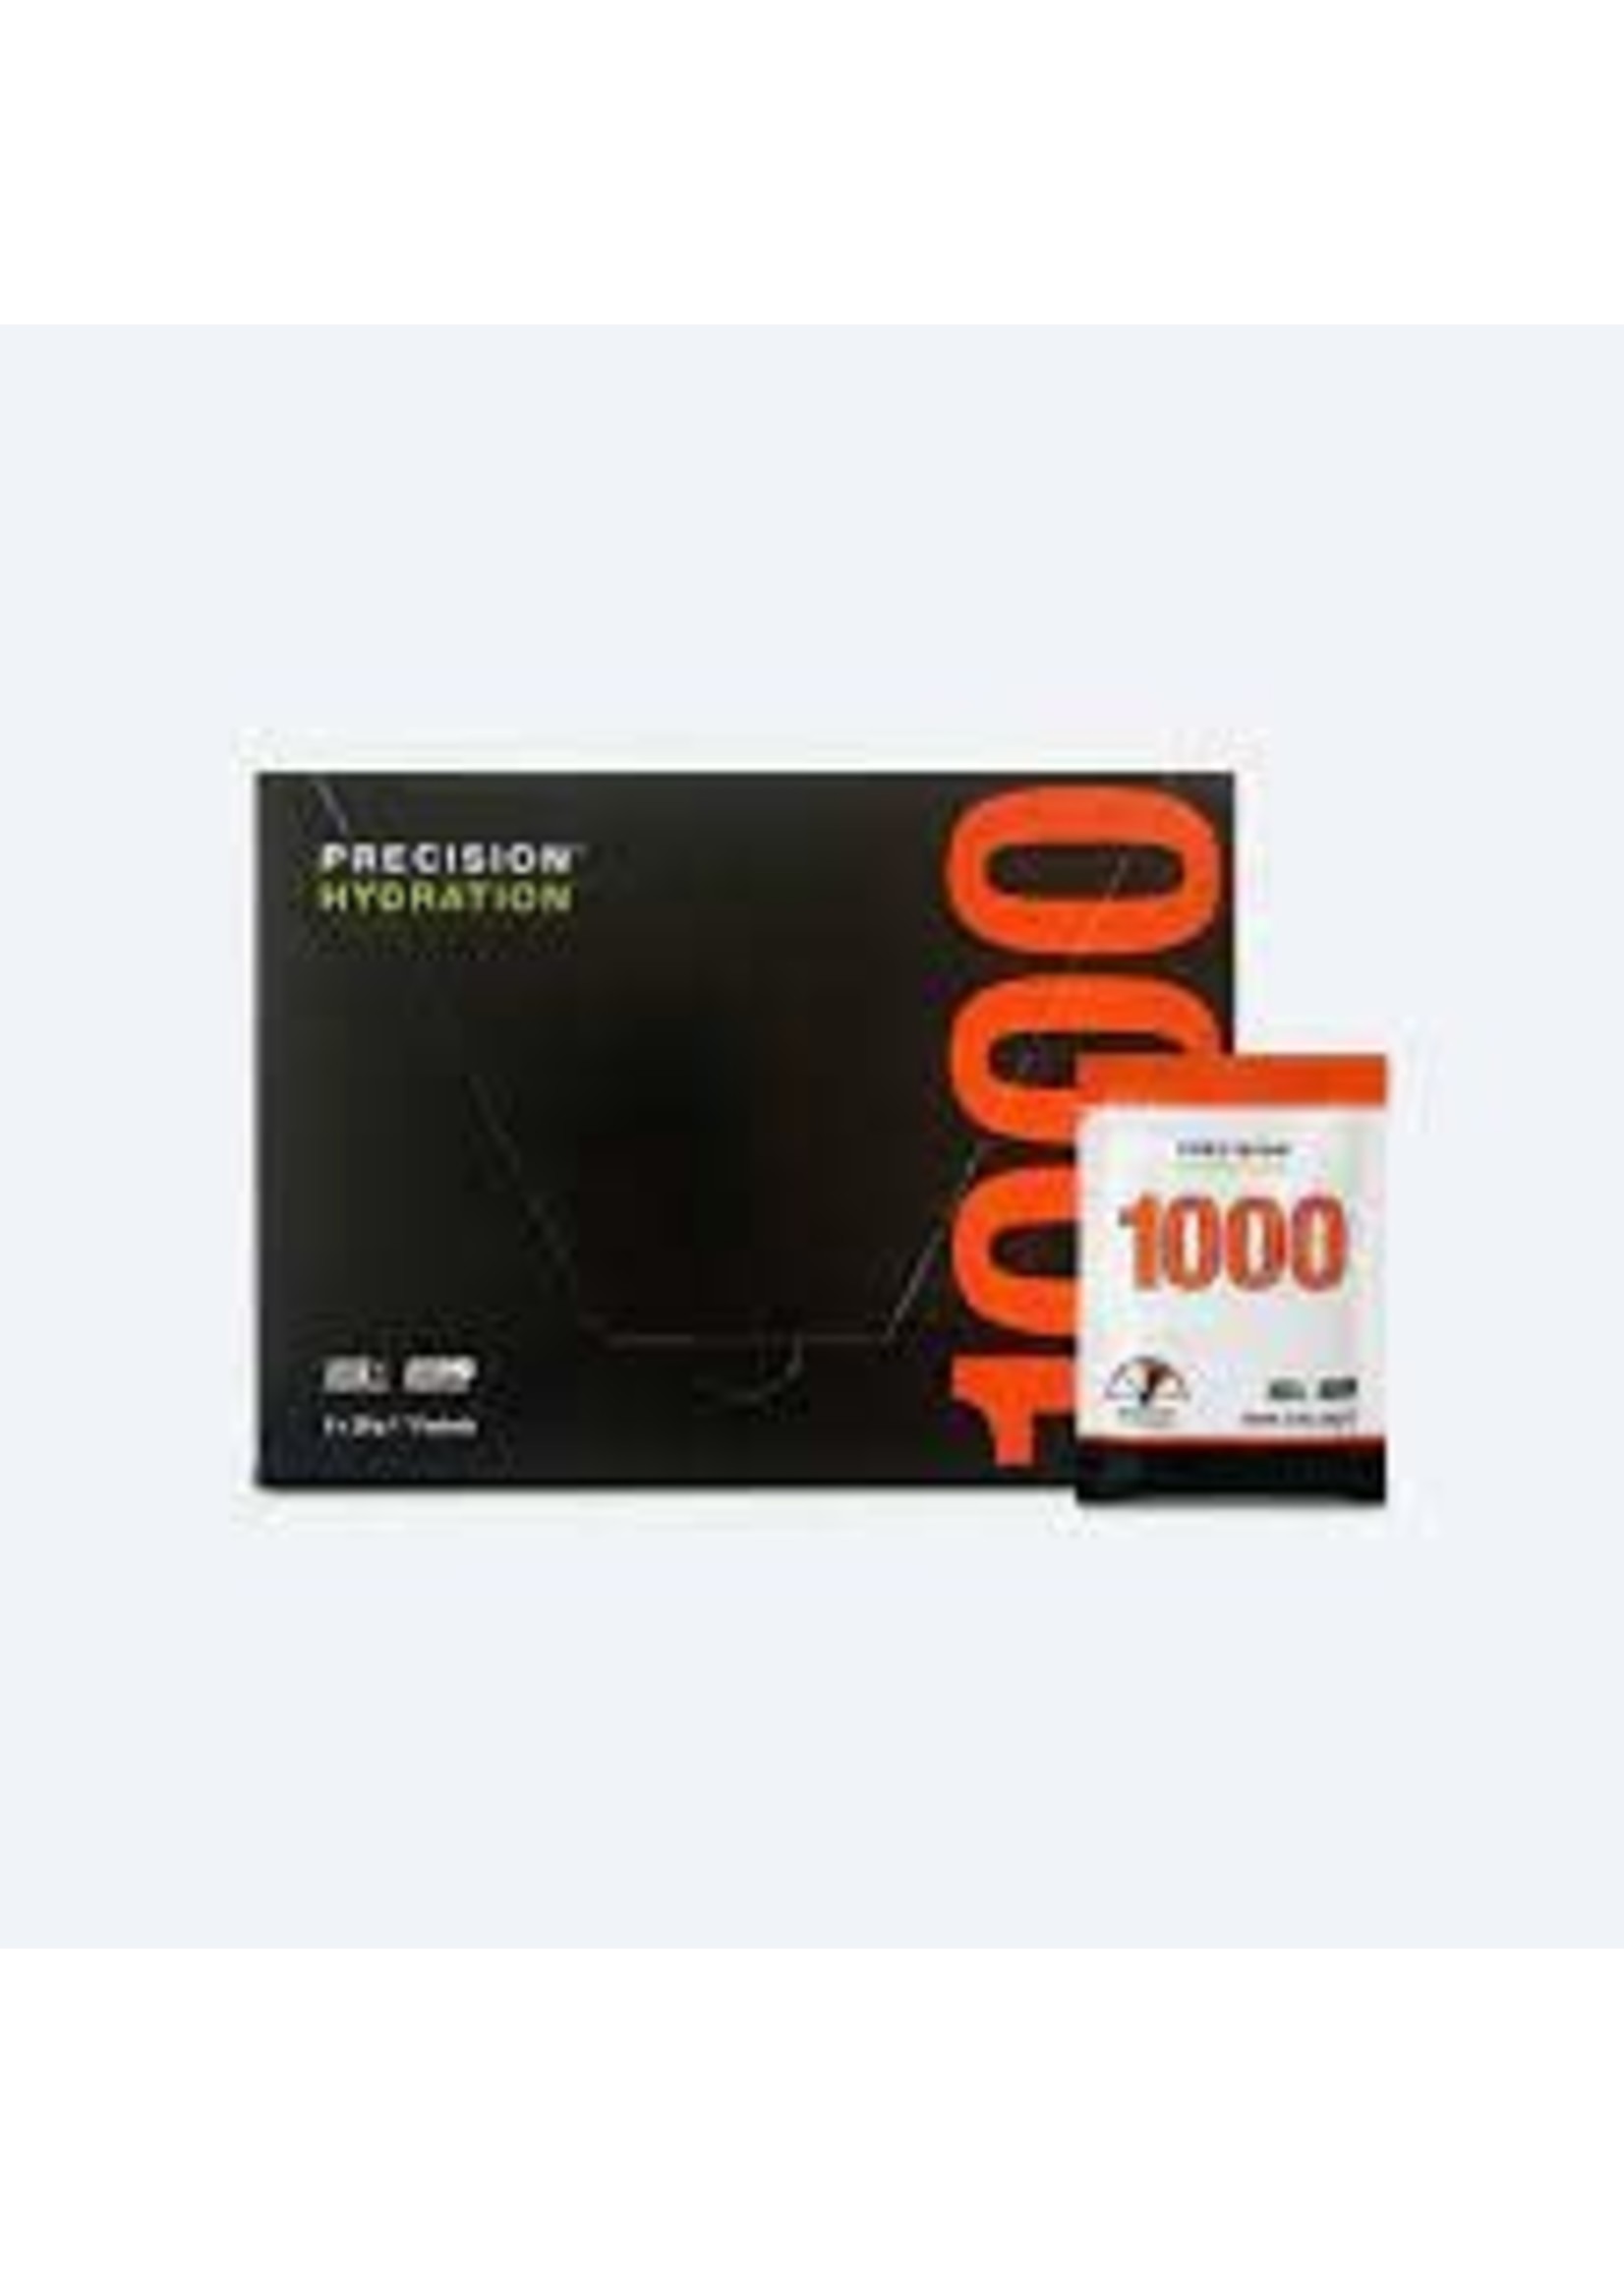 Precision Hydration PH 1000 Packets